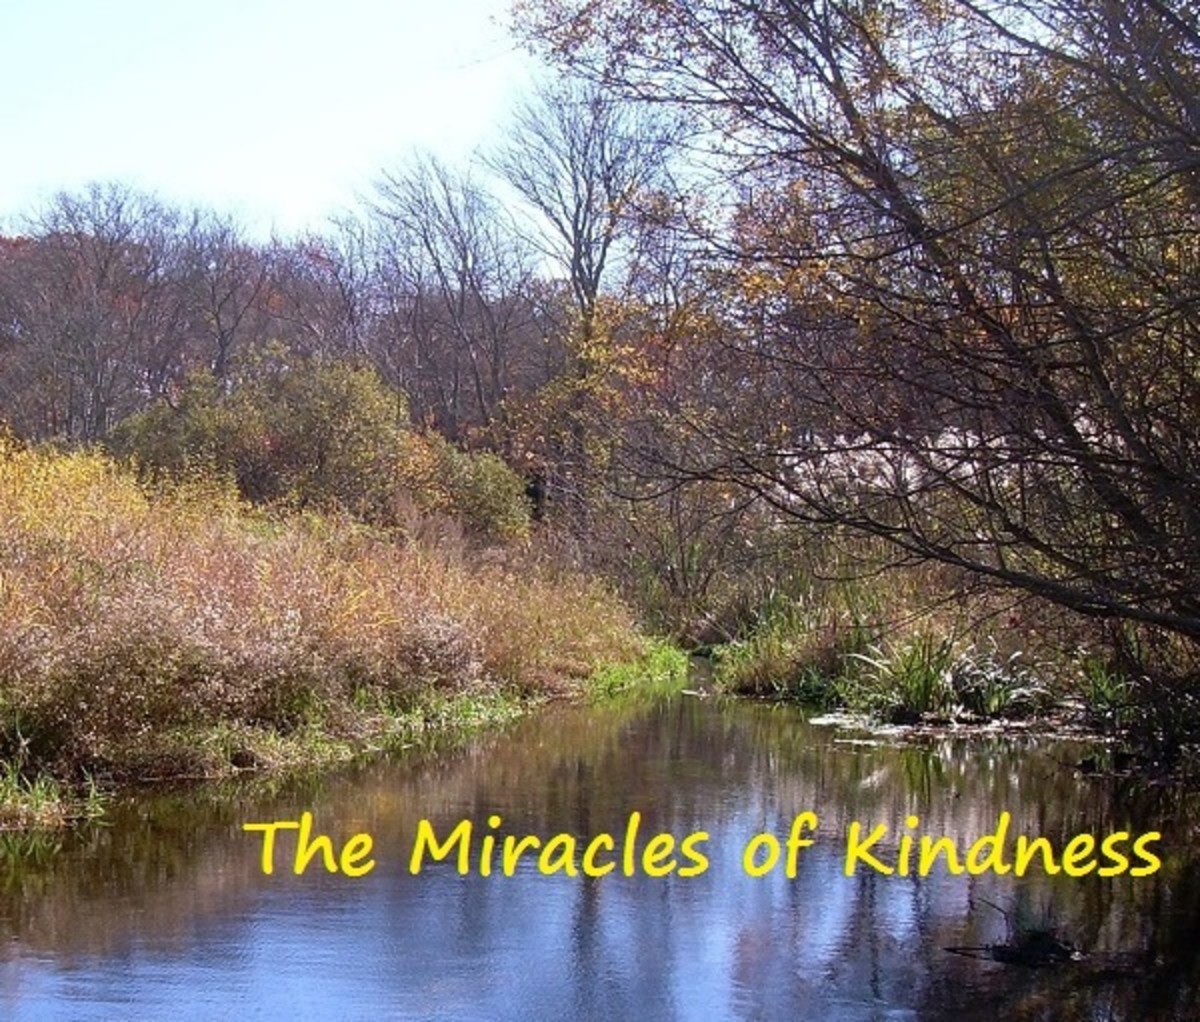 The Miracles of Kindness